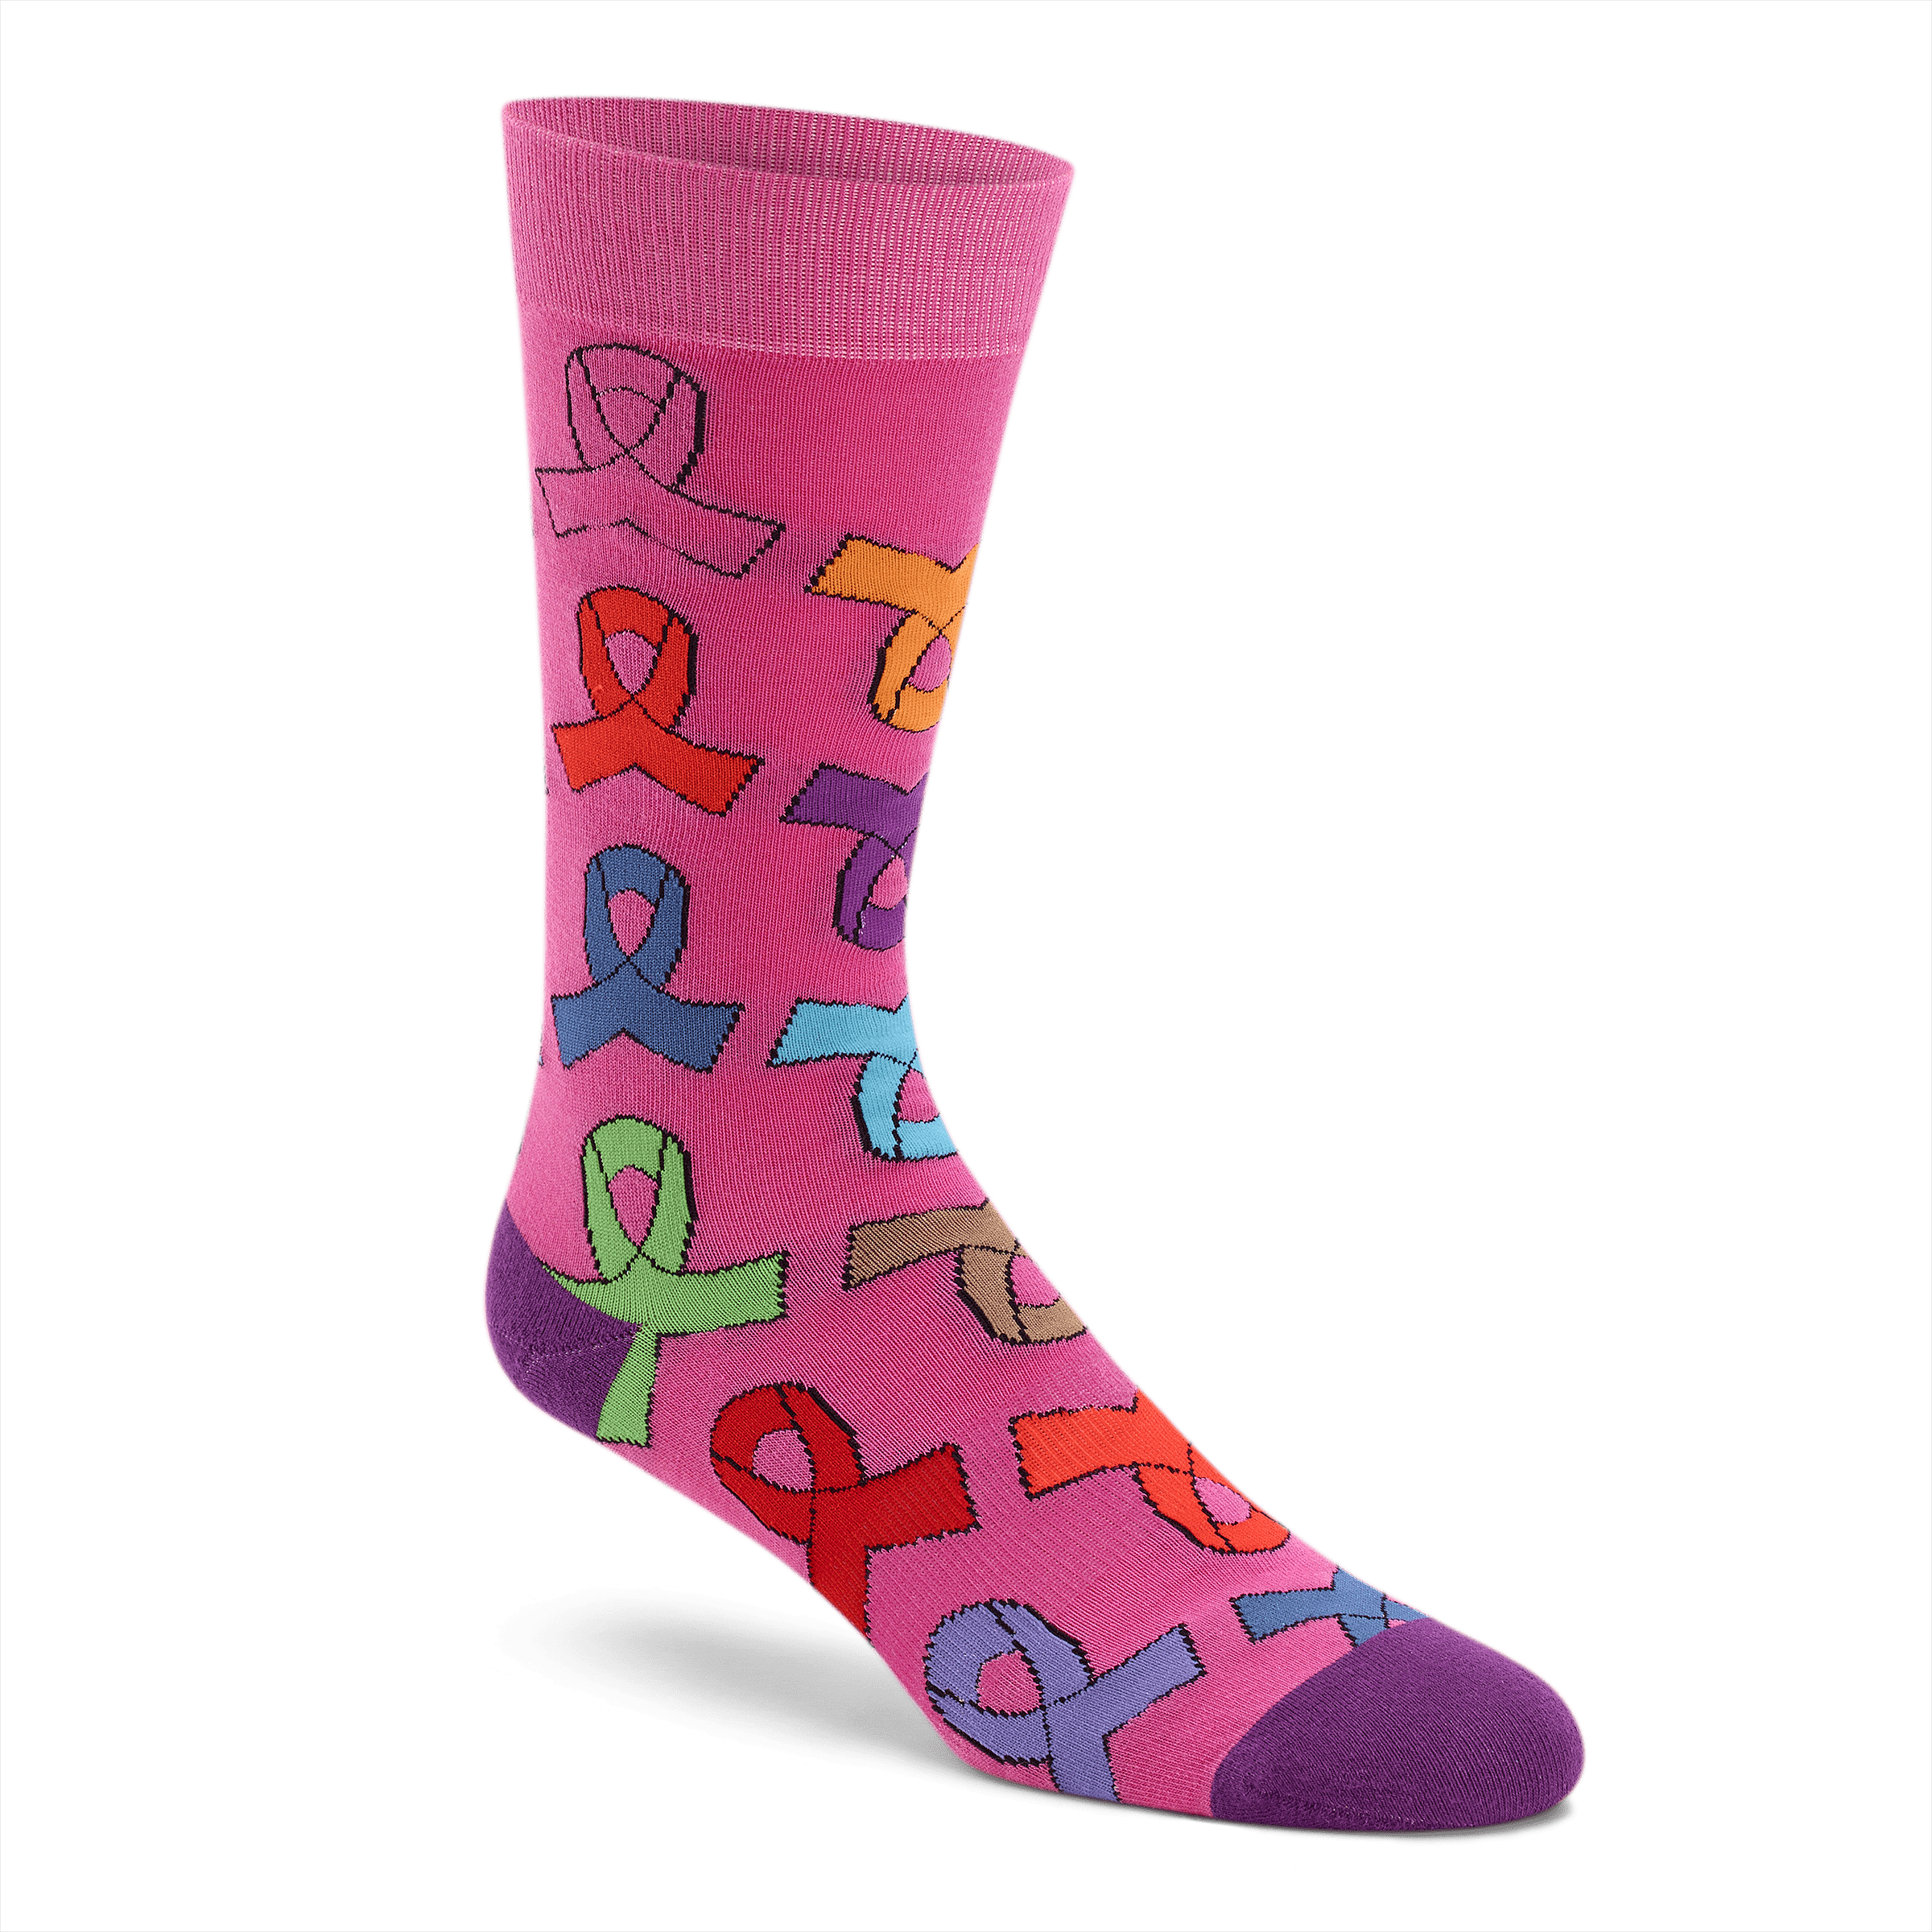 Sock Cancer And Help Find A Cure